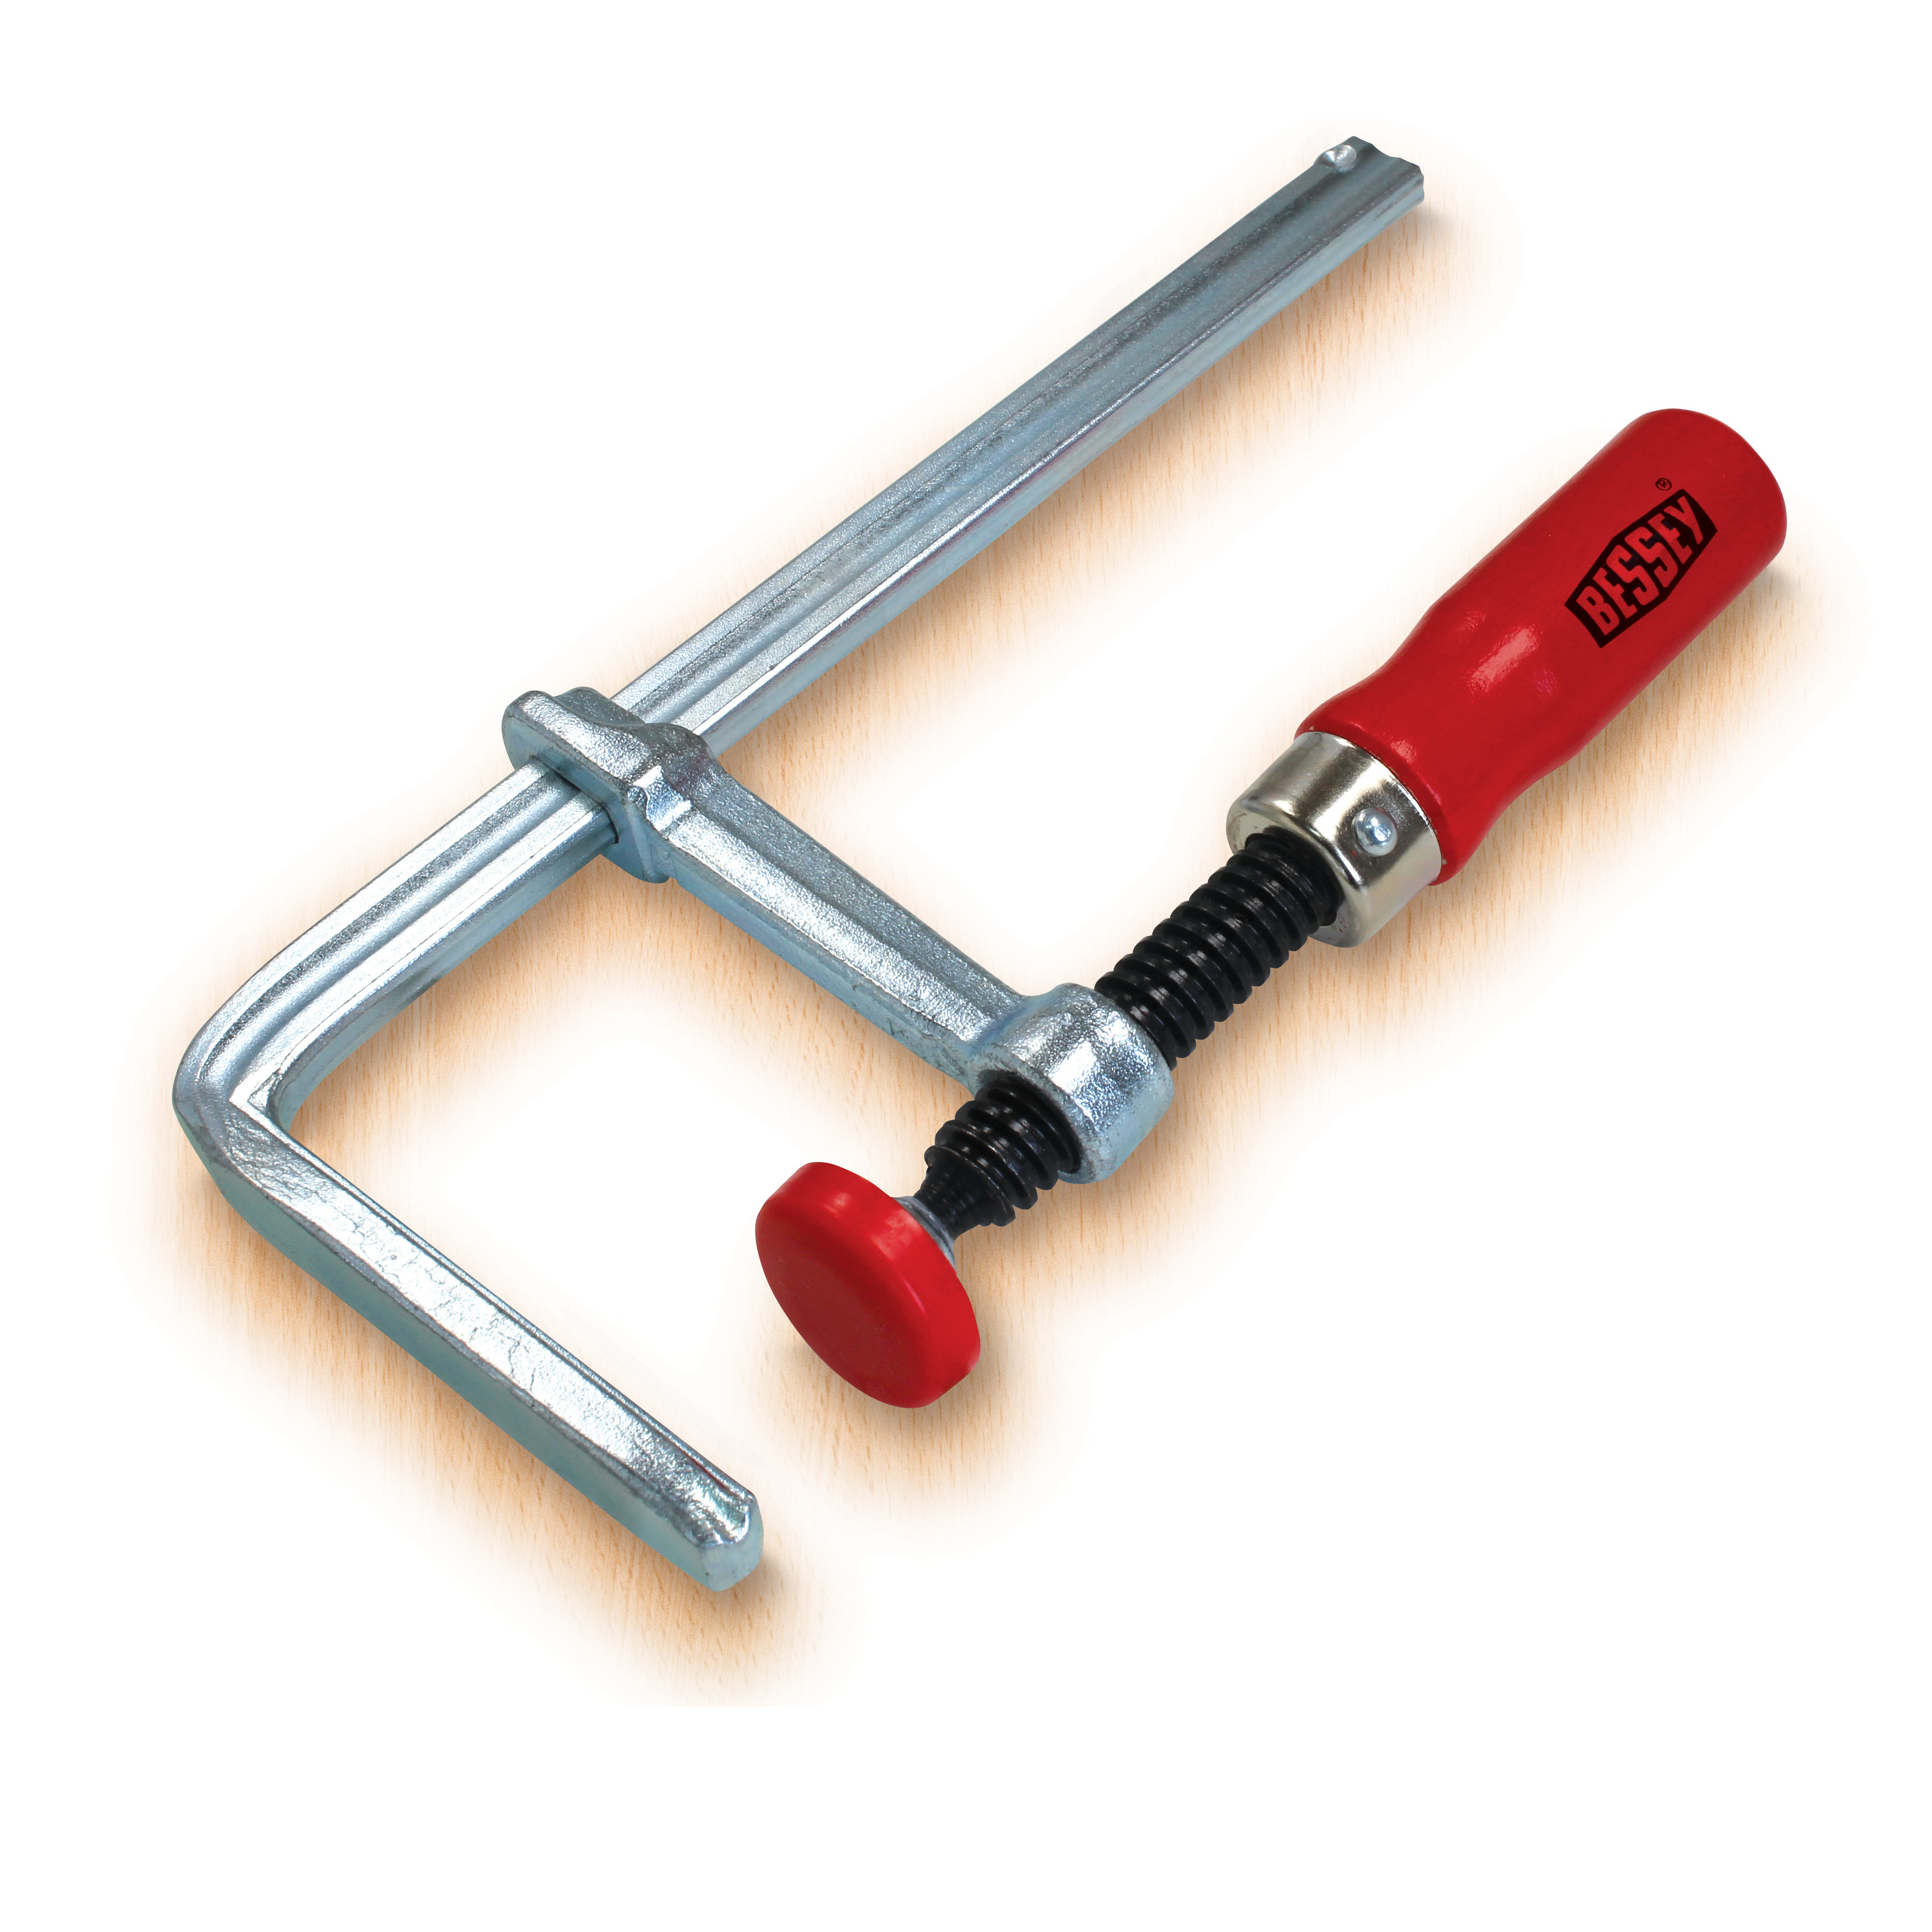 Bessey GTR12 Track/Table Clamp, 1.8 N Clamping, 4-11/16 in Max Opening Size, 2-5/16 in D Throat, Steel Body - 3